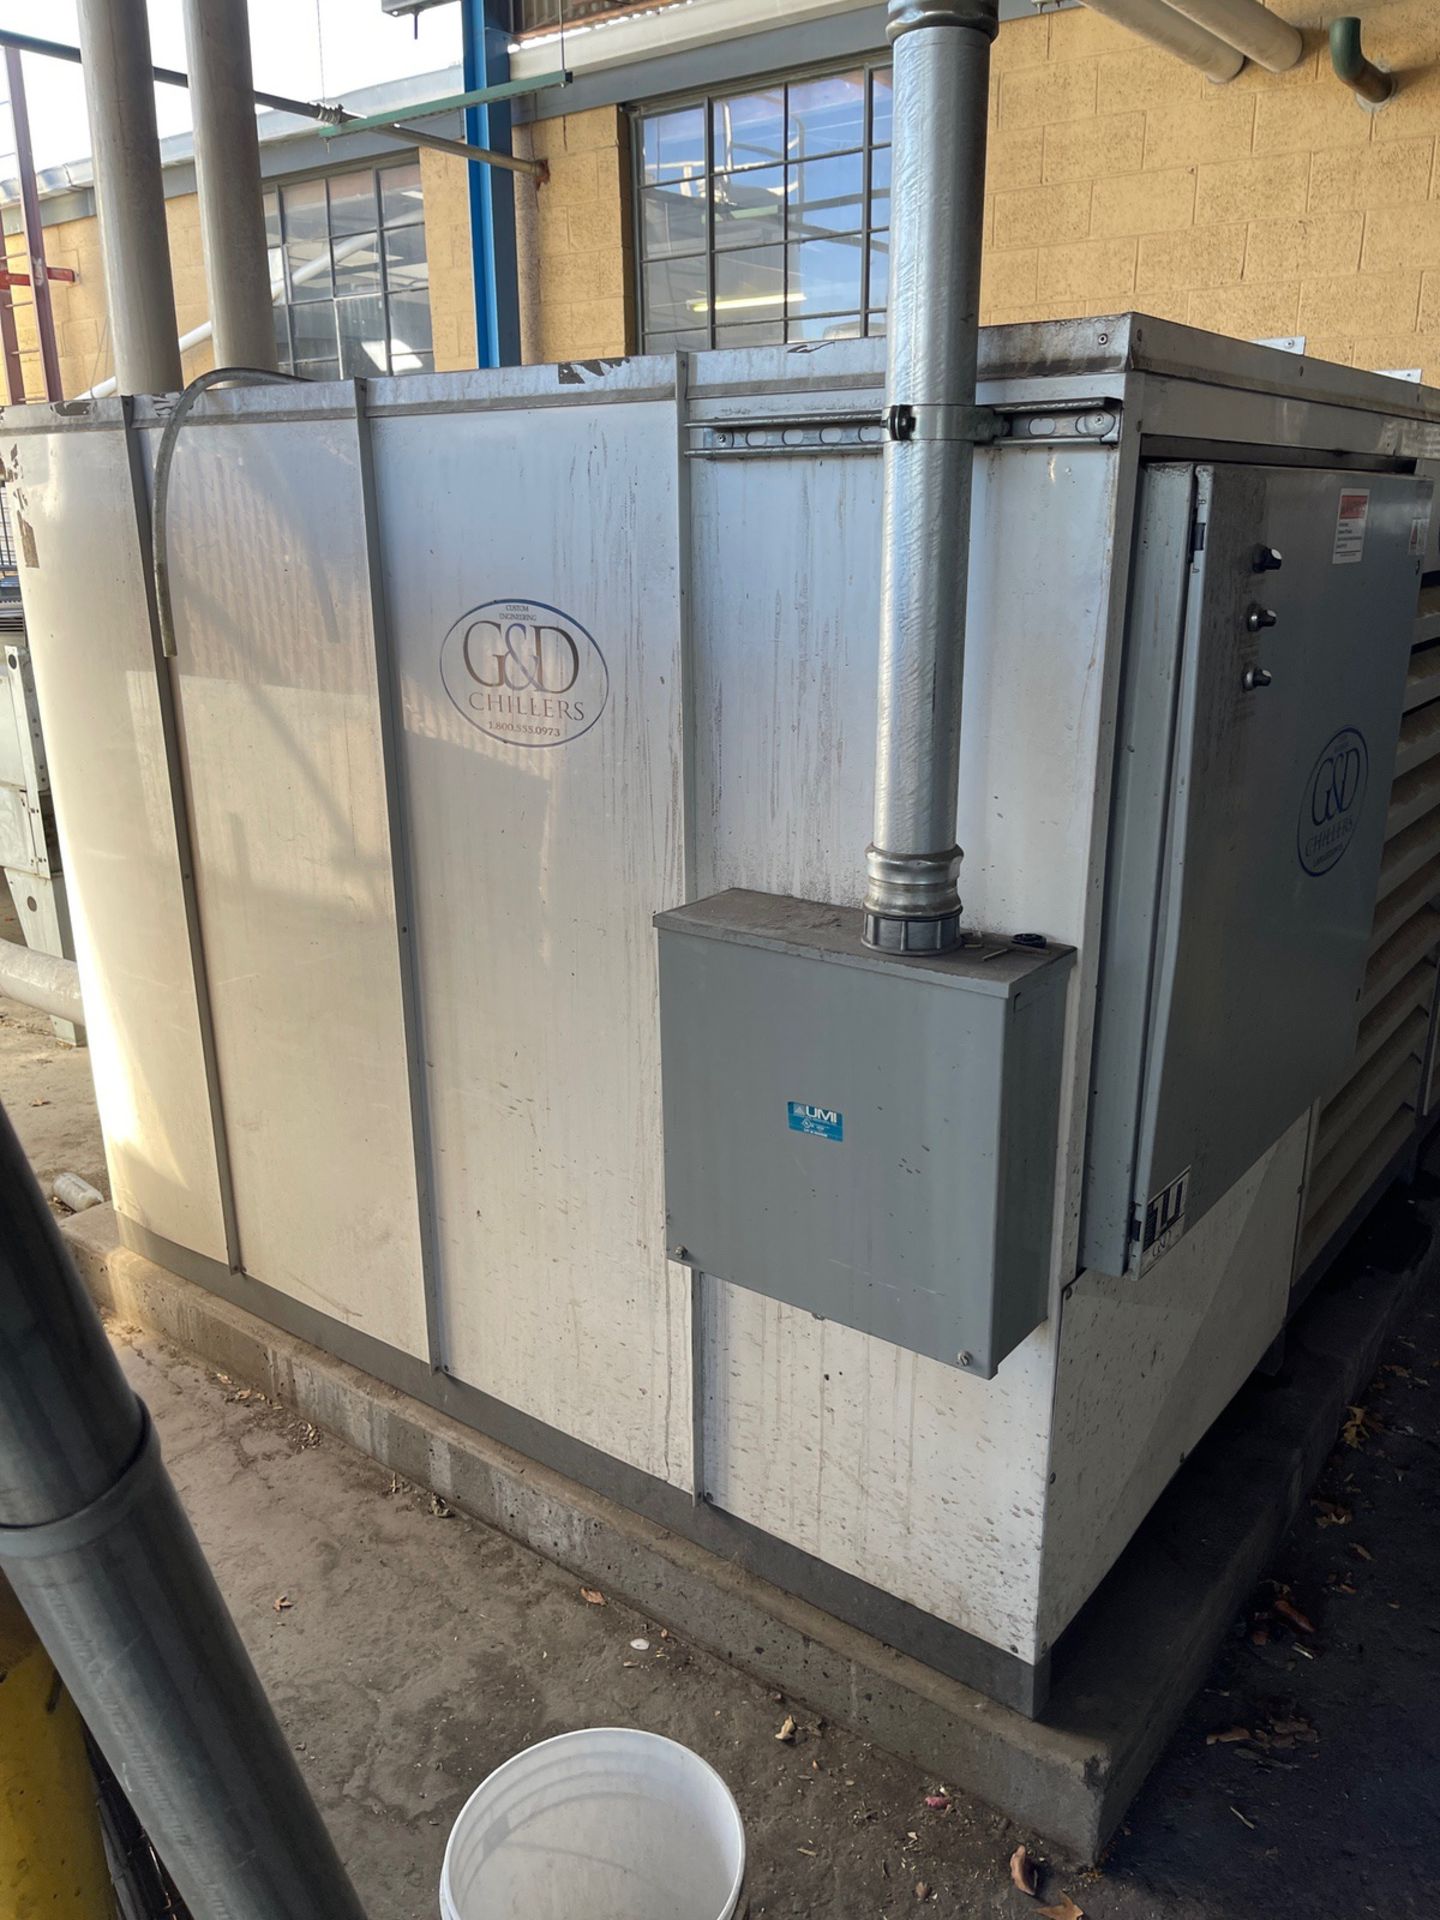 G&D Chillers GD-80H Glycol Chiller, Dual 40HP Compressors, 500 Gallon Reservoir Tank | Rig Fee $1050 - Image 2 of 5